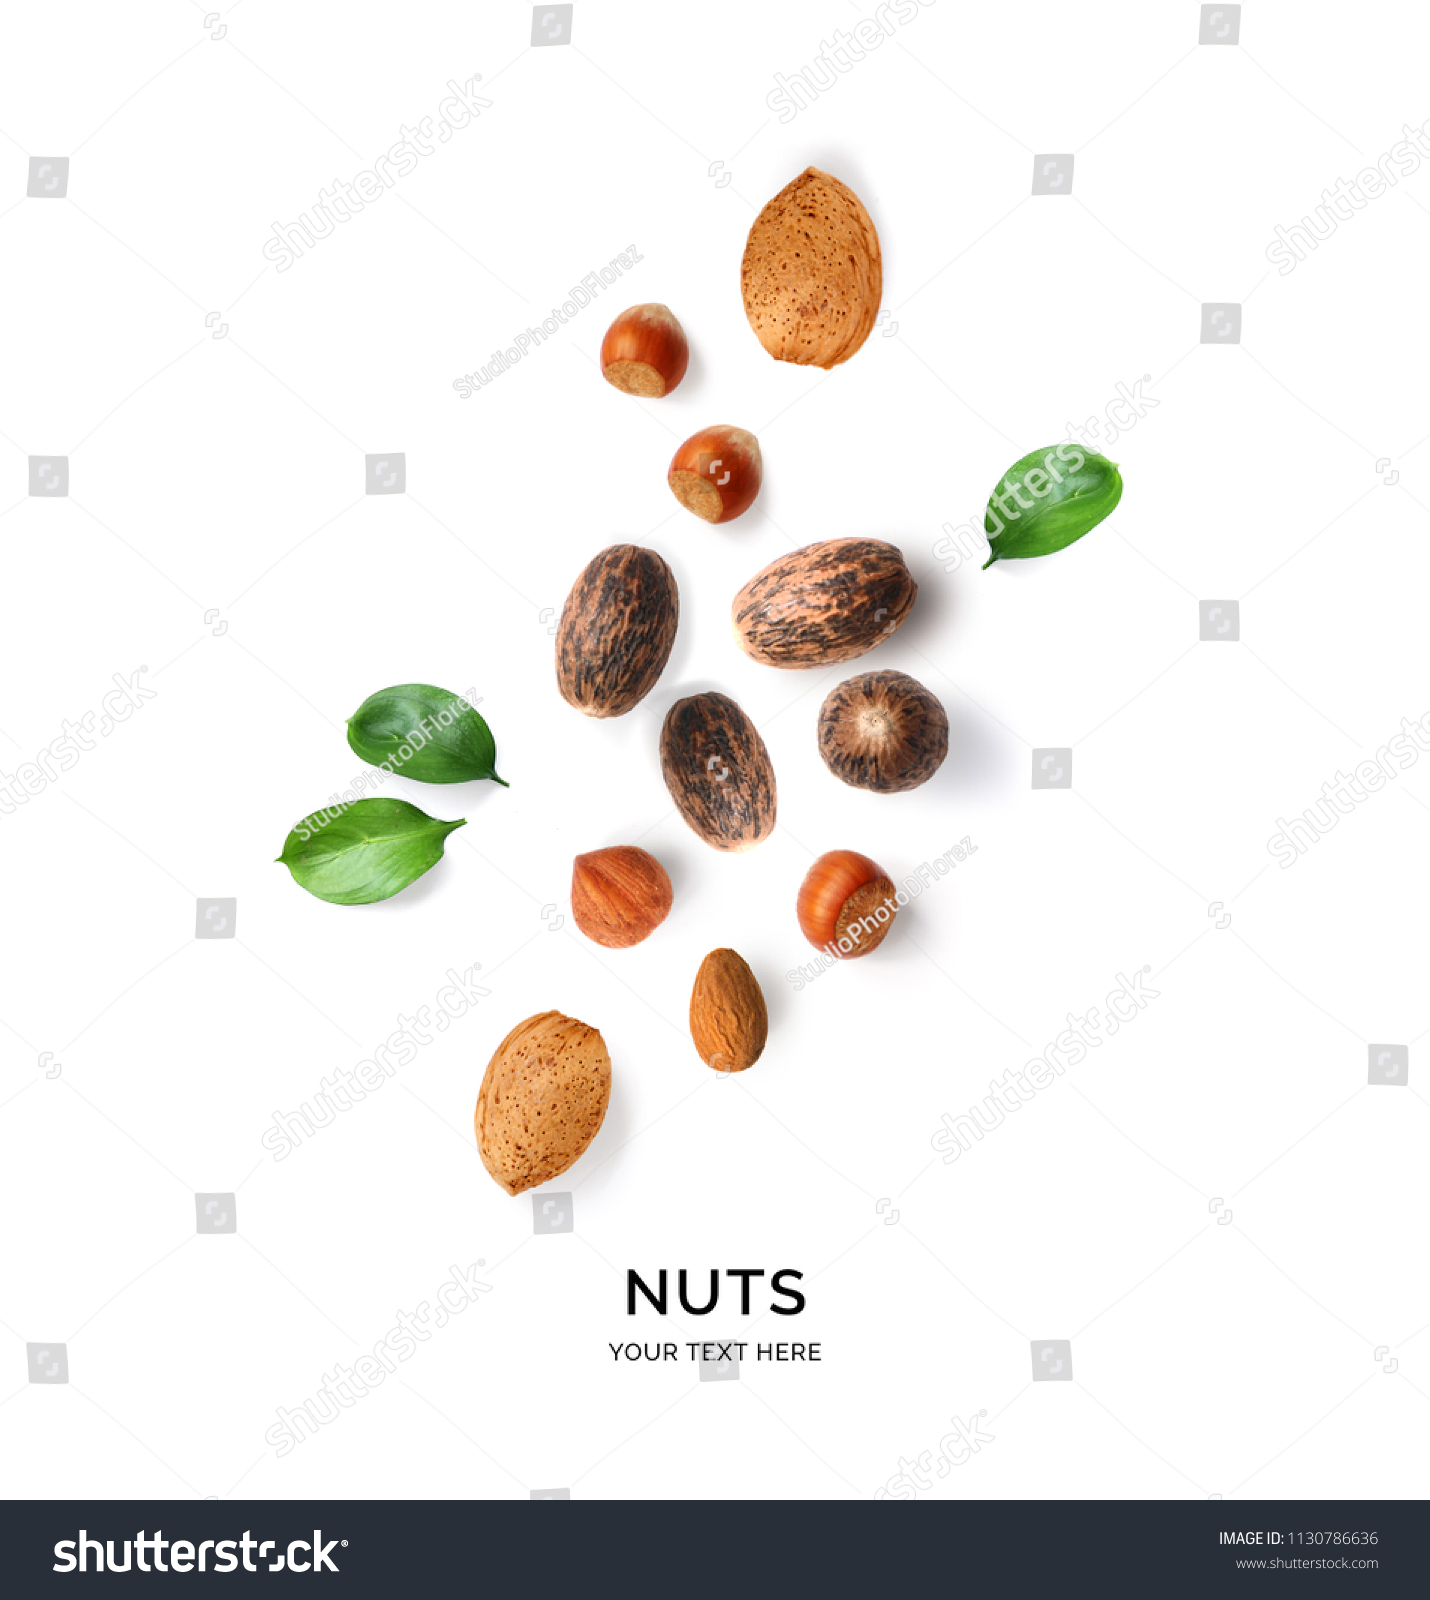 Creative Layout Made Hazelnut Nuts Almonds Food And Drink Stock Image 1130786636,Tri Tip Slow Cooker Bbq